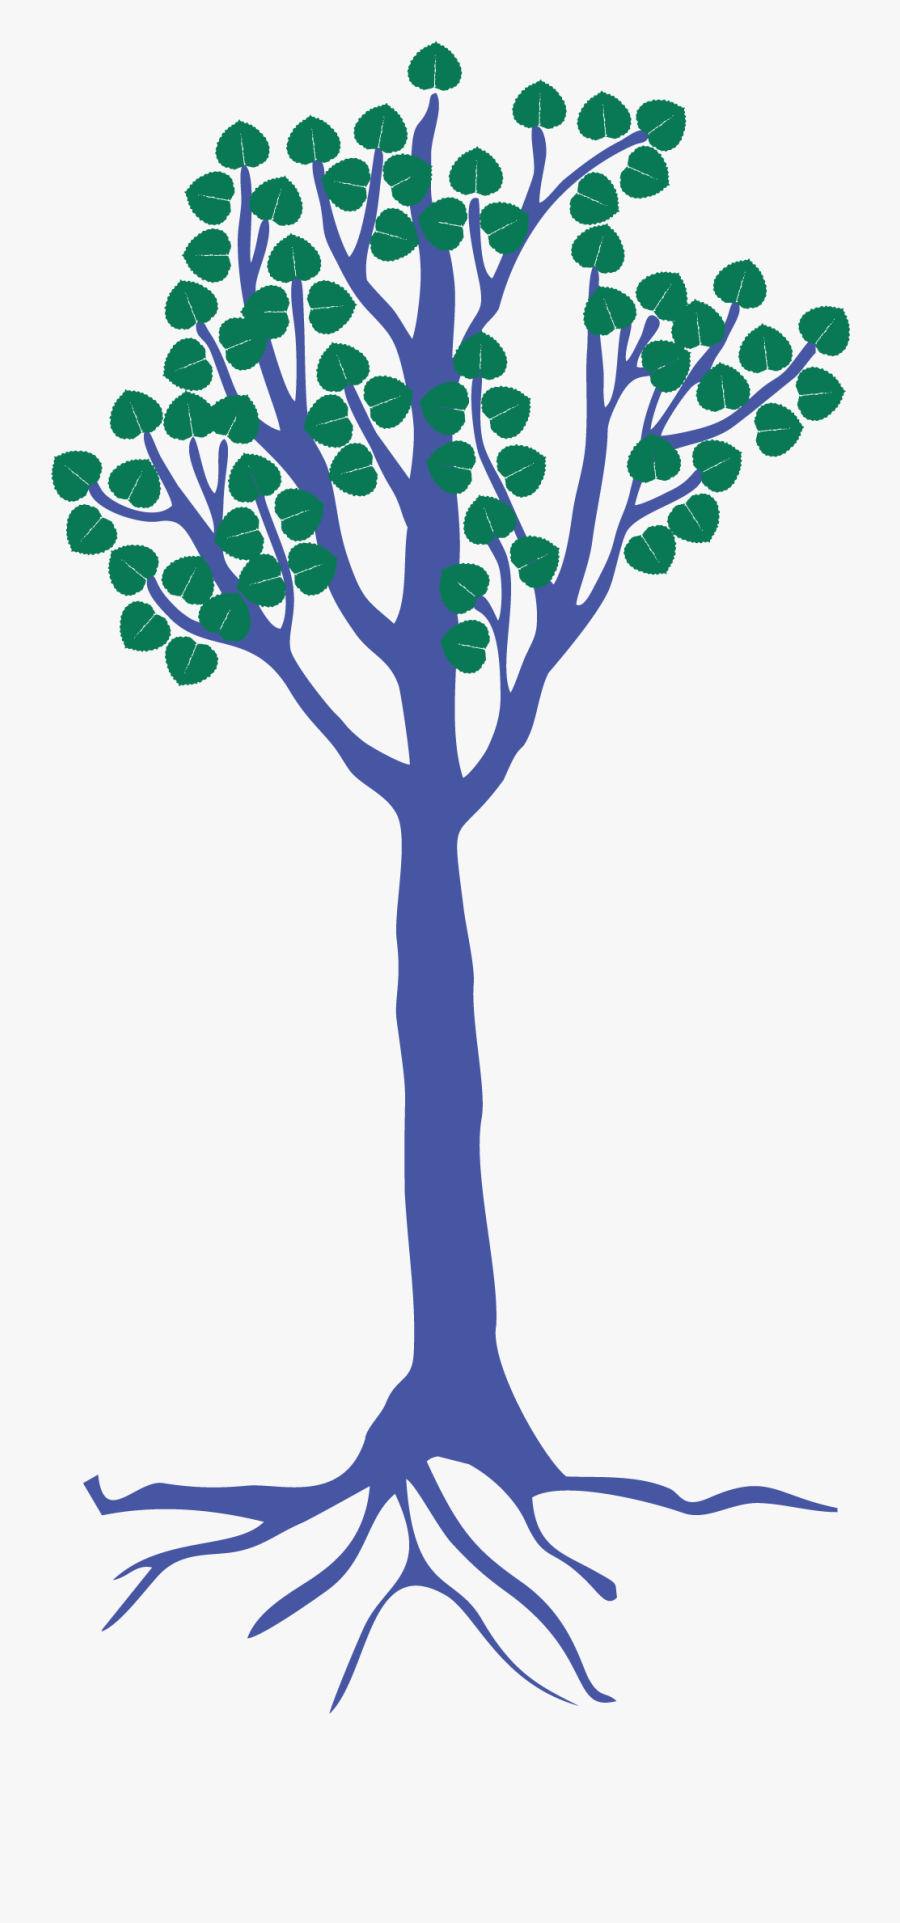 Tree Alone - Silhouette, Transparent Clipart